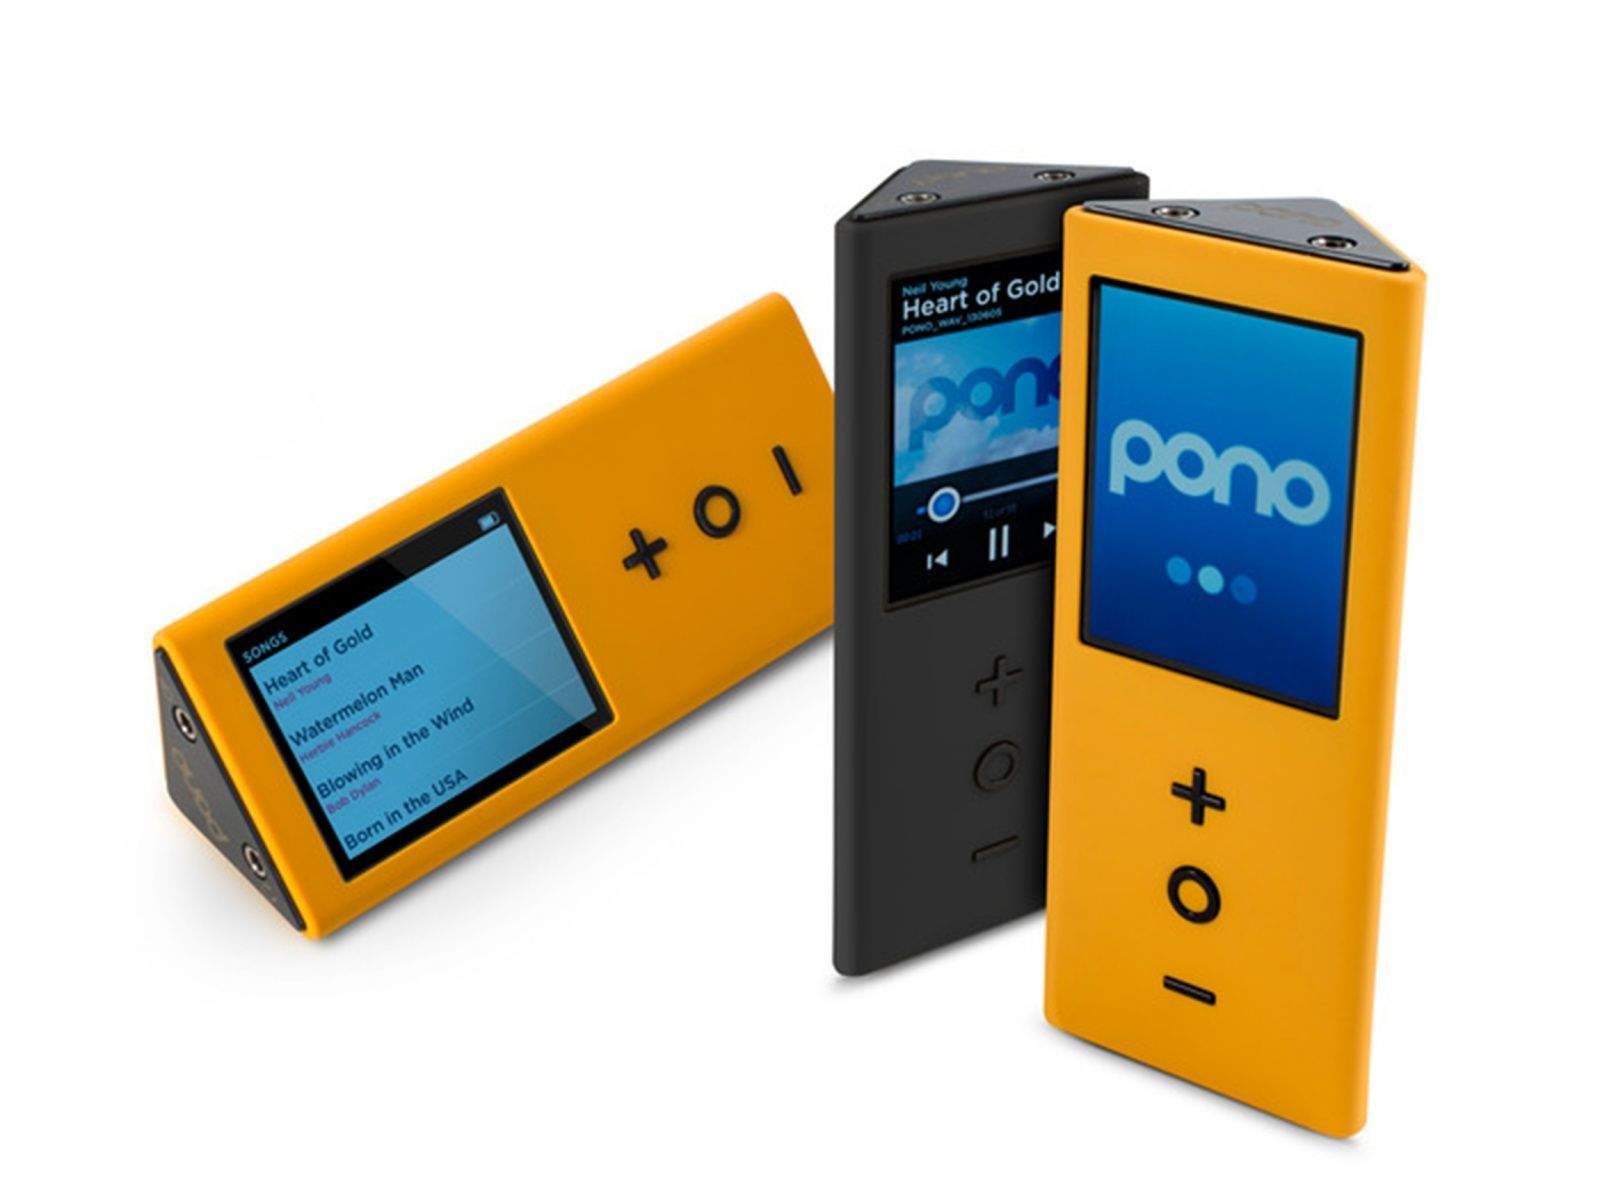 Neil Young's PonoPlayer digital music player is getting ripped by critics who say it sounds no better than an iPhone. Photo: PonoMusic